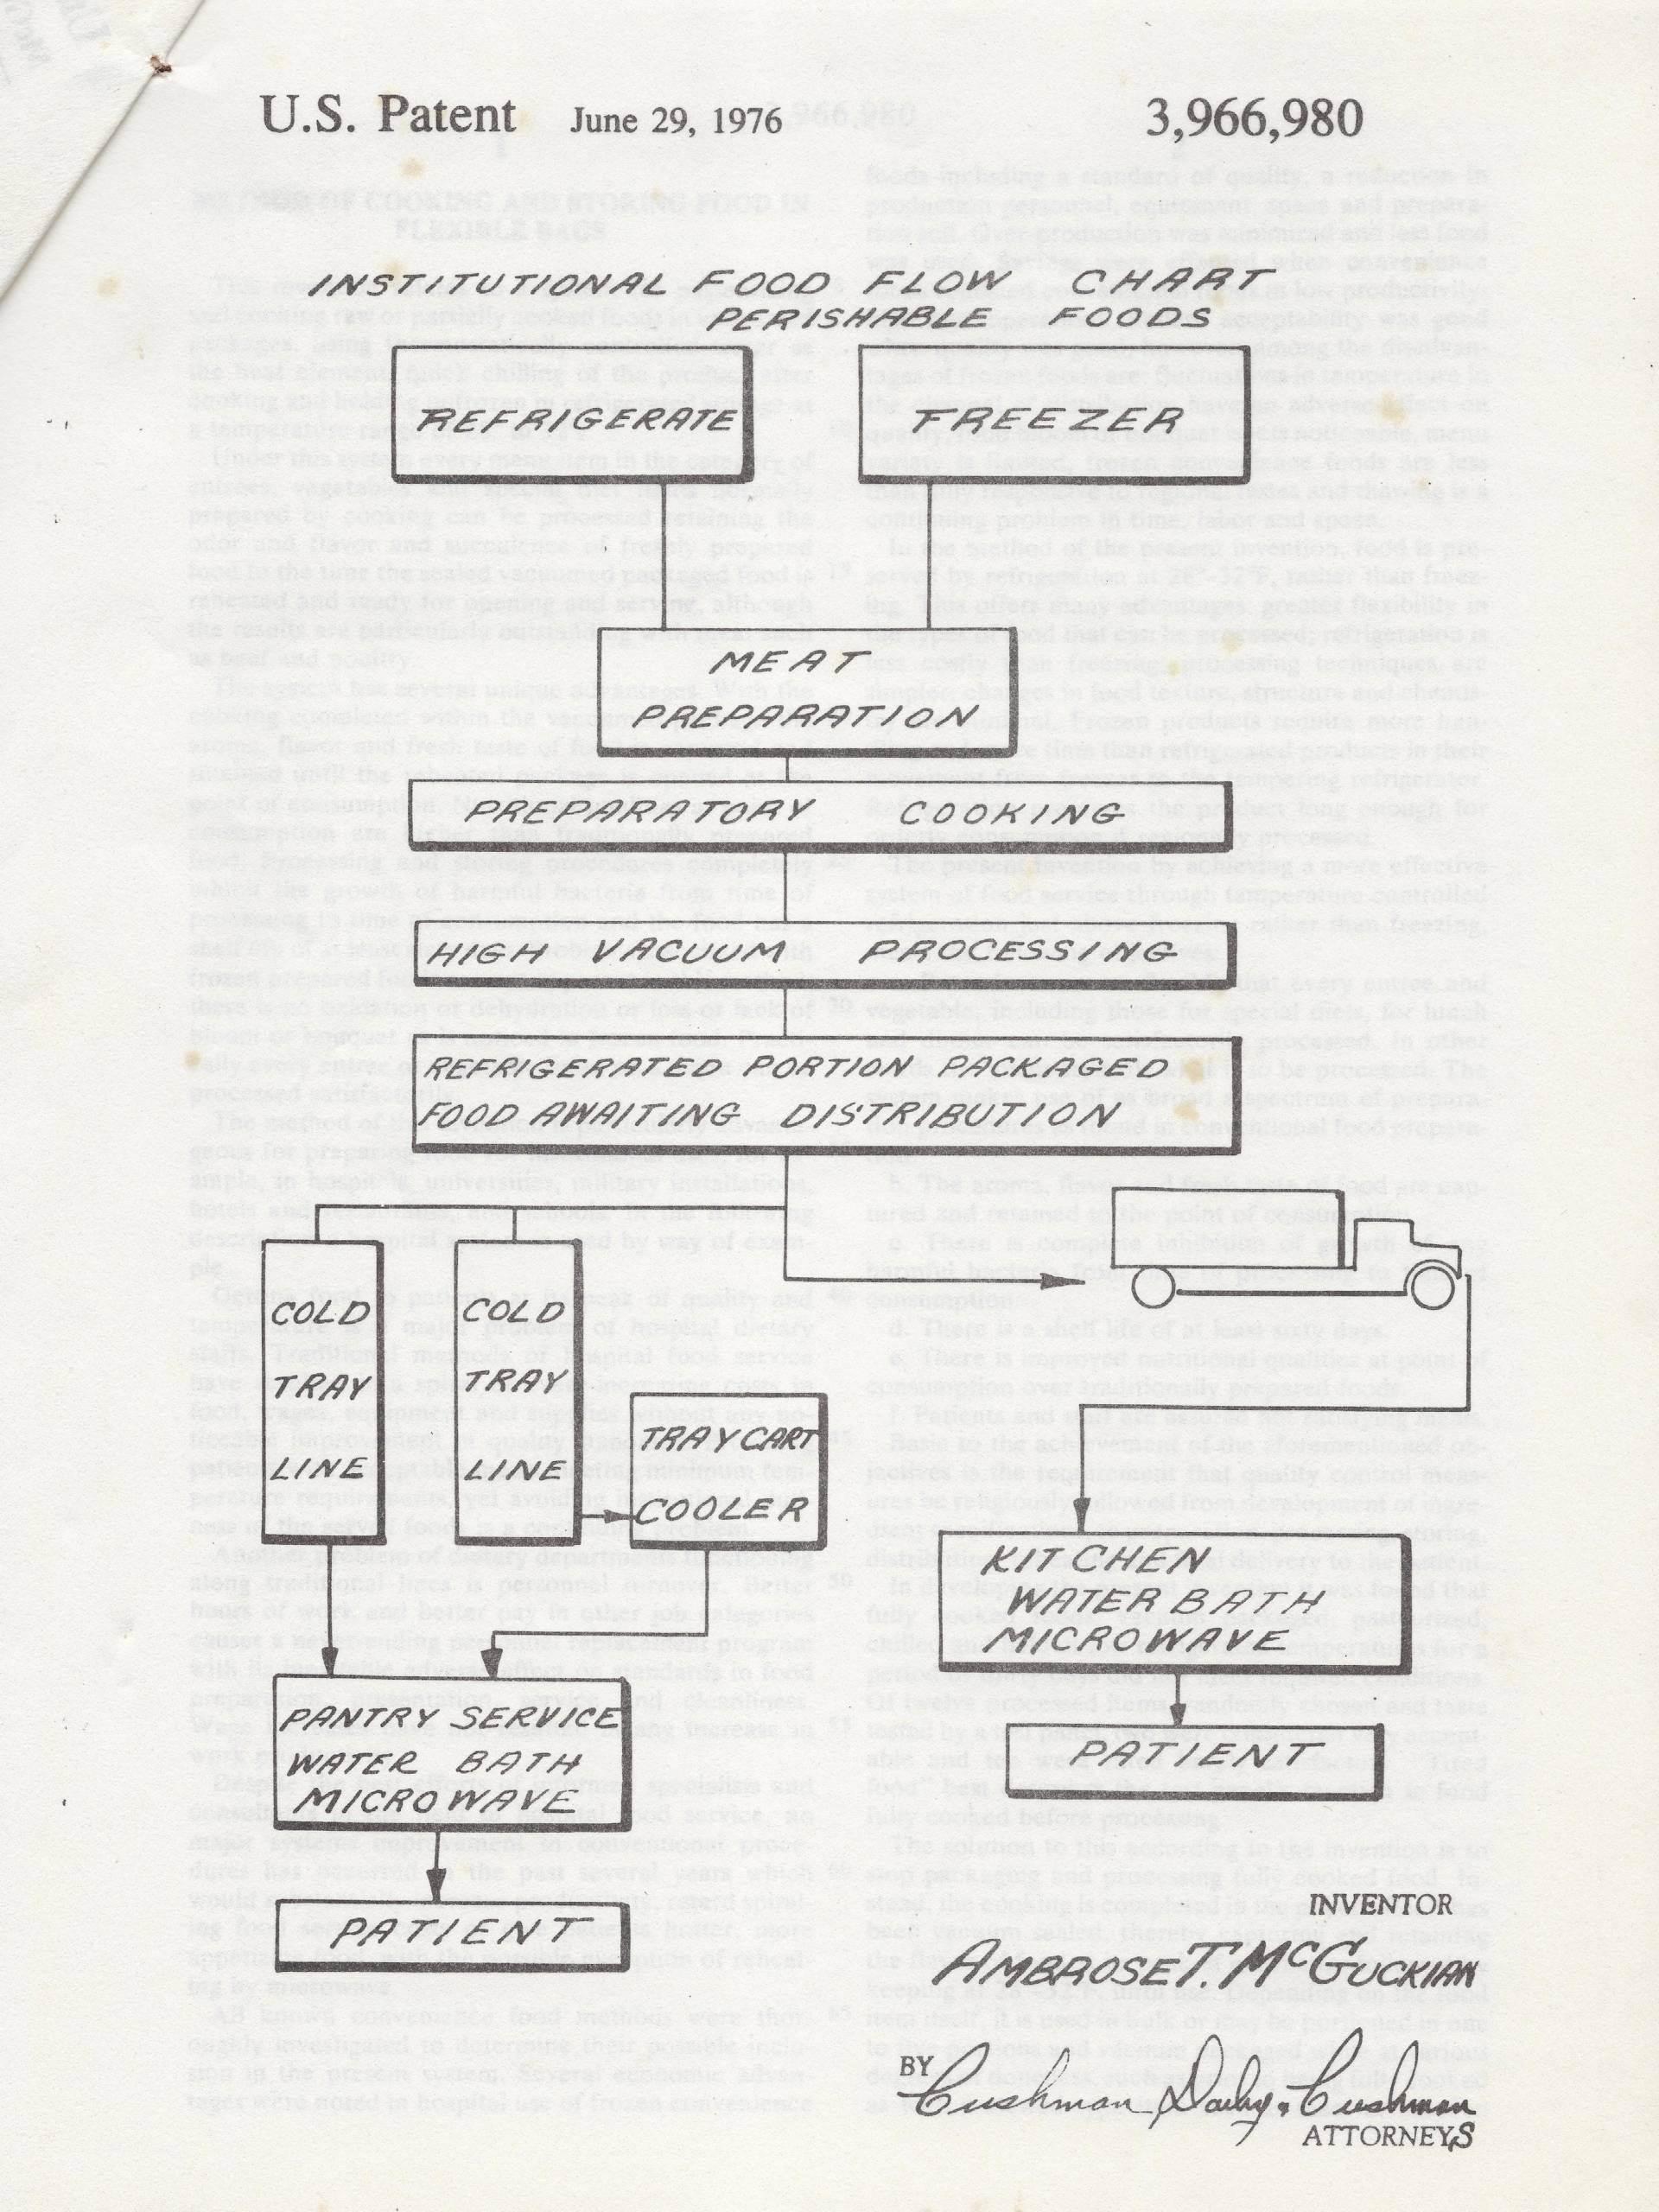 Ambrose McGuckian created a flowchart to illustrate the sequence of hospital food service from storage to preparation to patient for his patent.